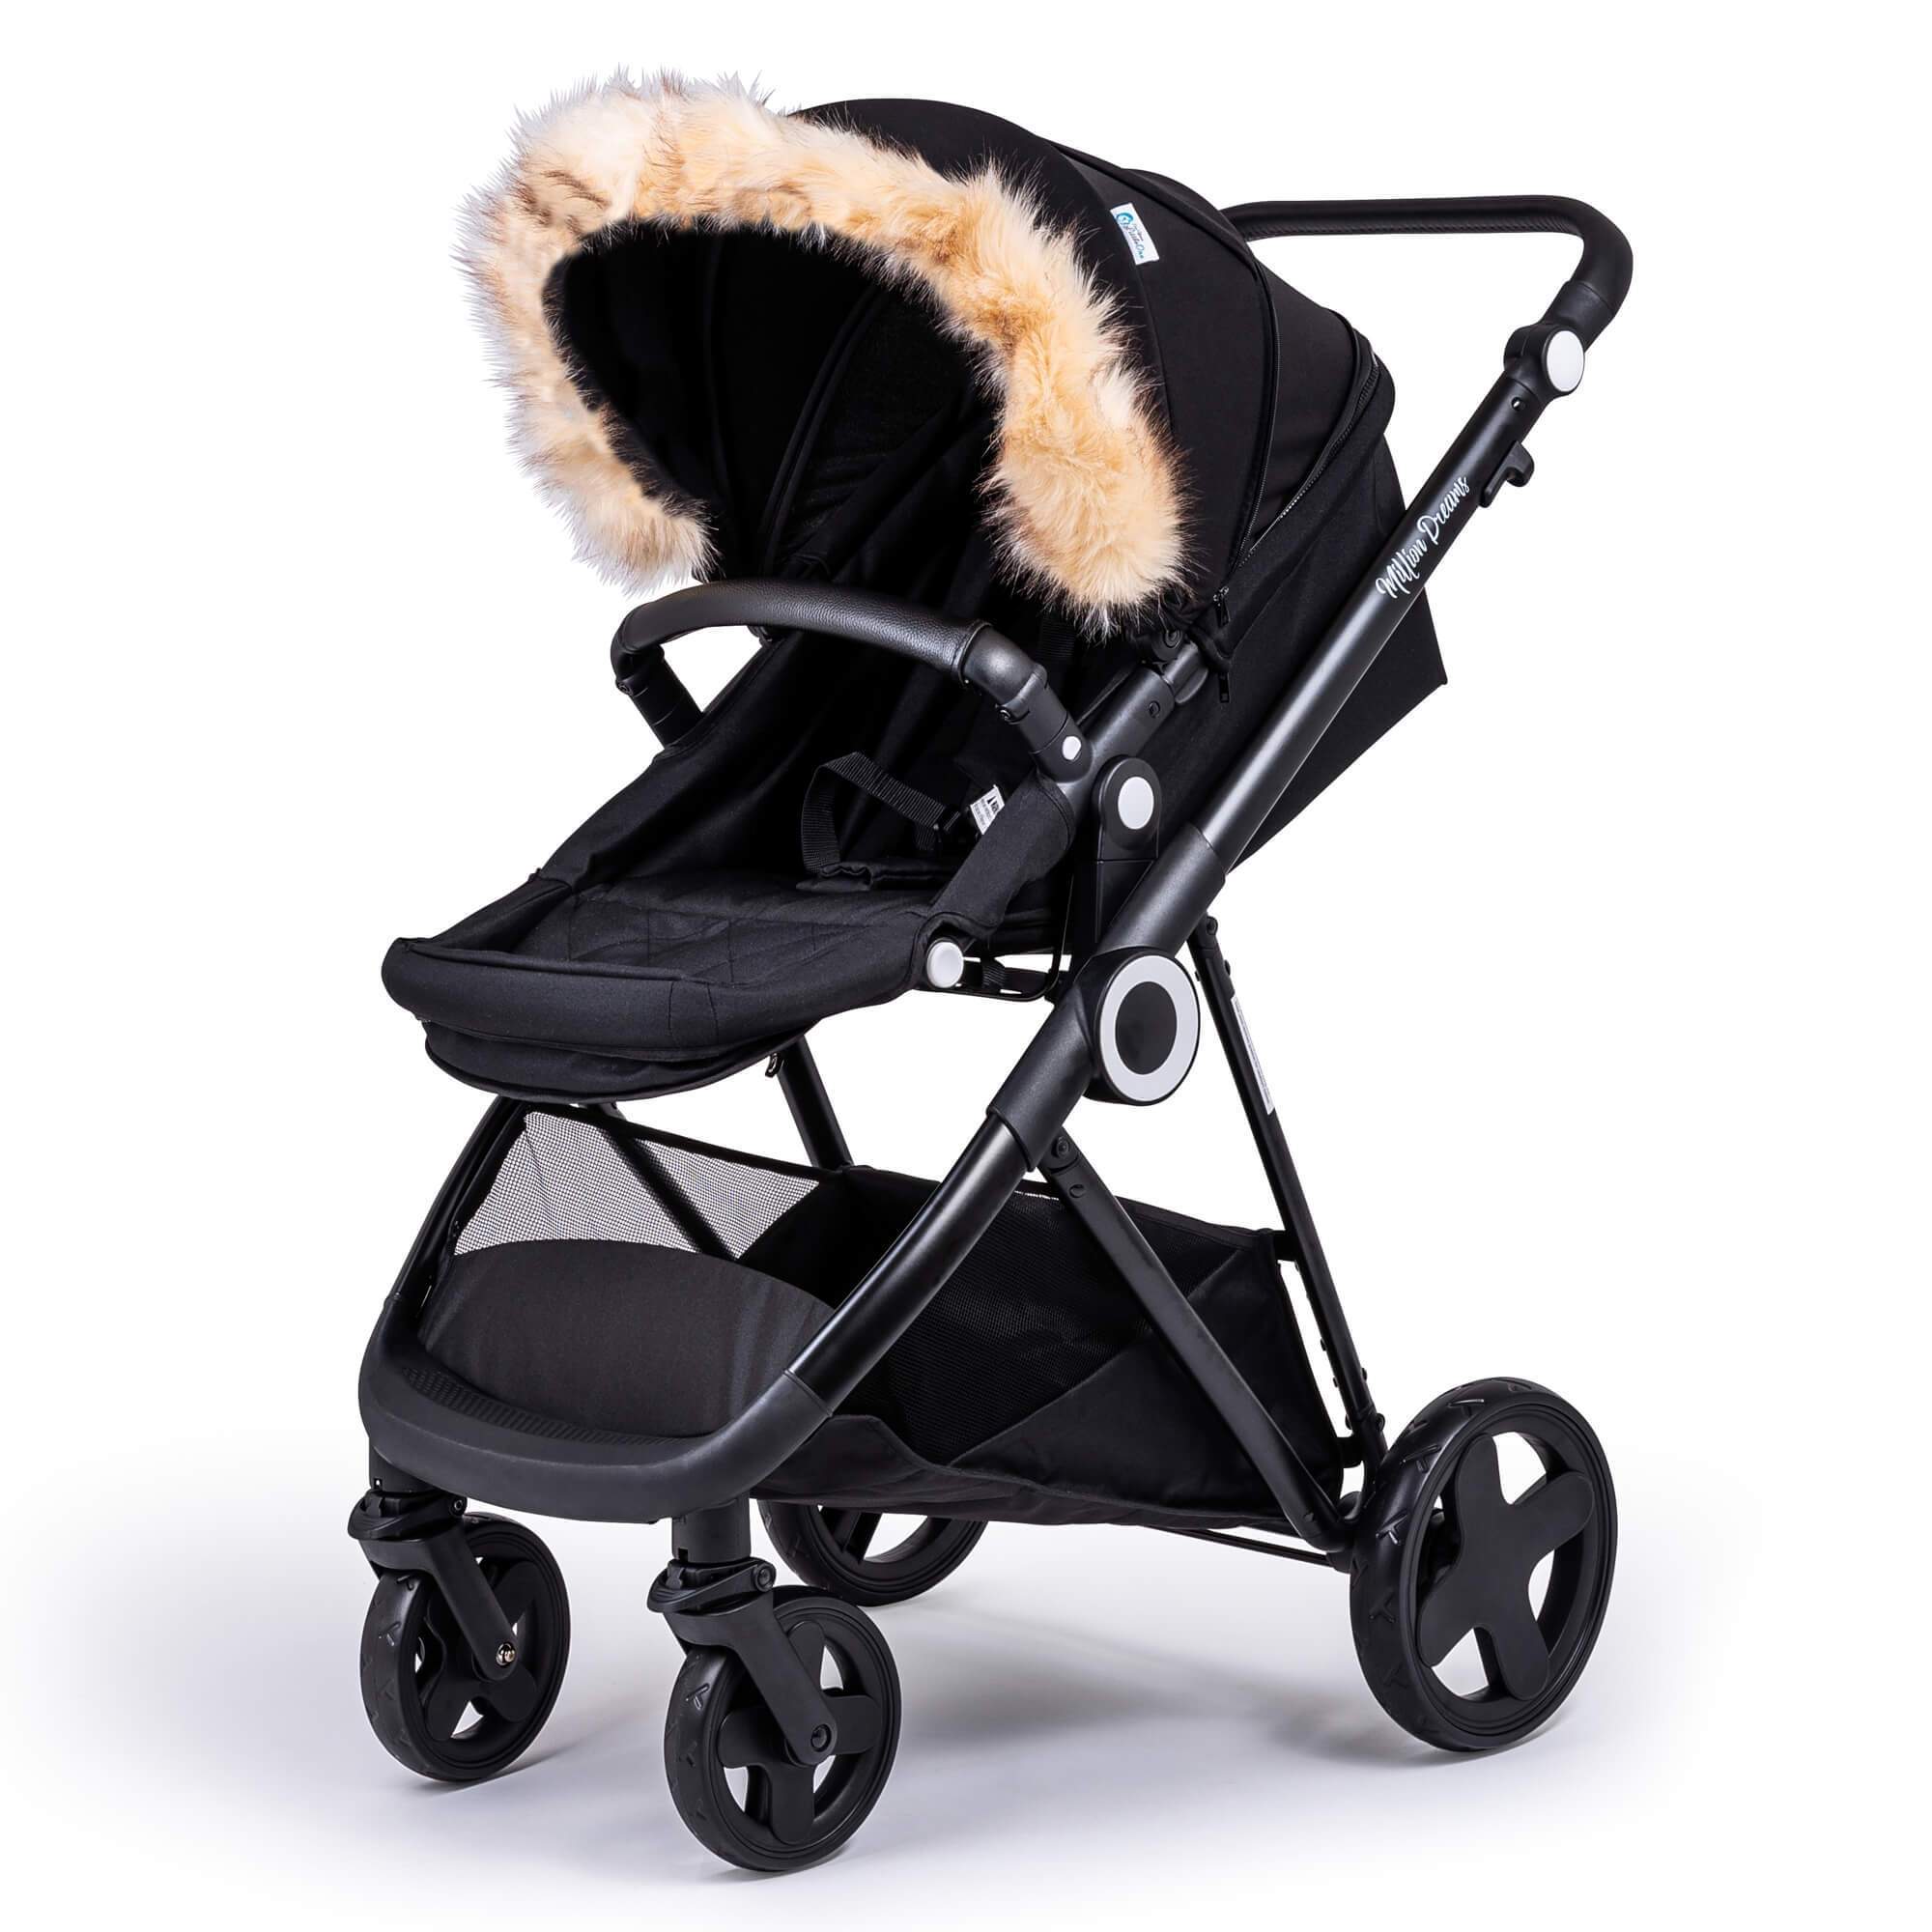 Pram Fur Hood Trim Attachment for Pushchair Compatible with Egg - For Your Little One